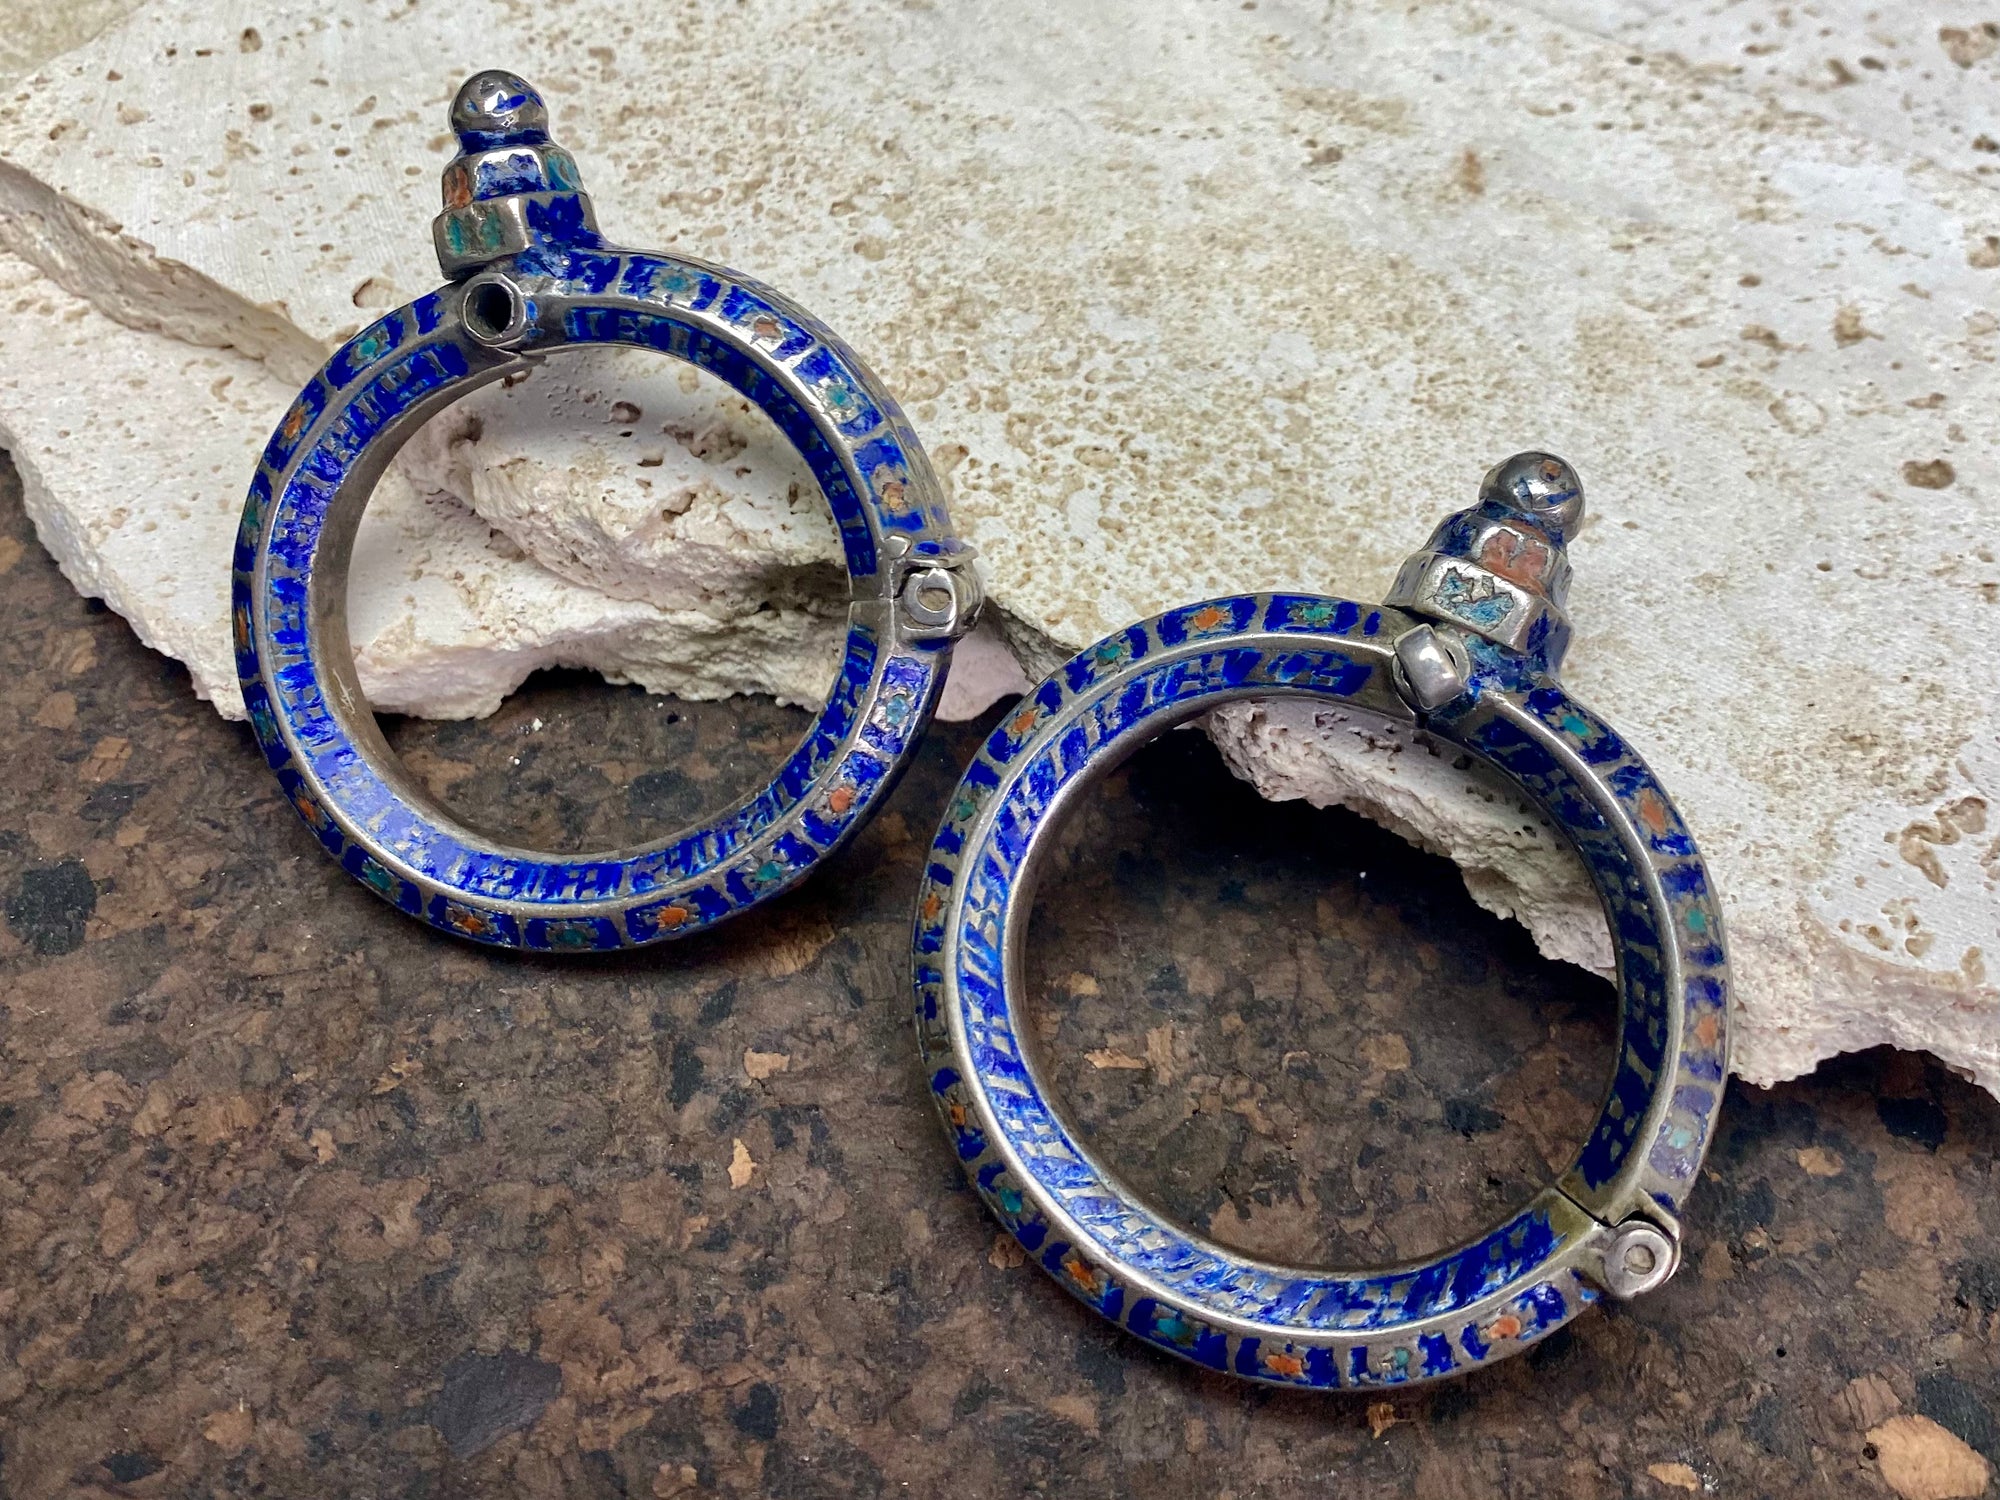 Pair of antique hinged and enameled cuffs, 19th century, Mulan Pakistan, silver